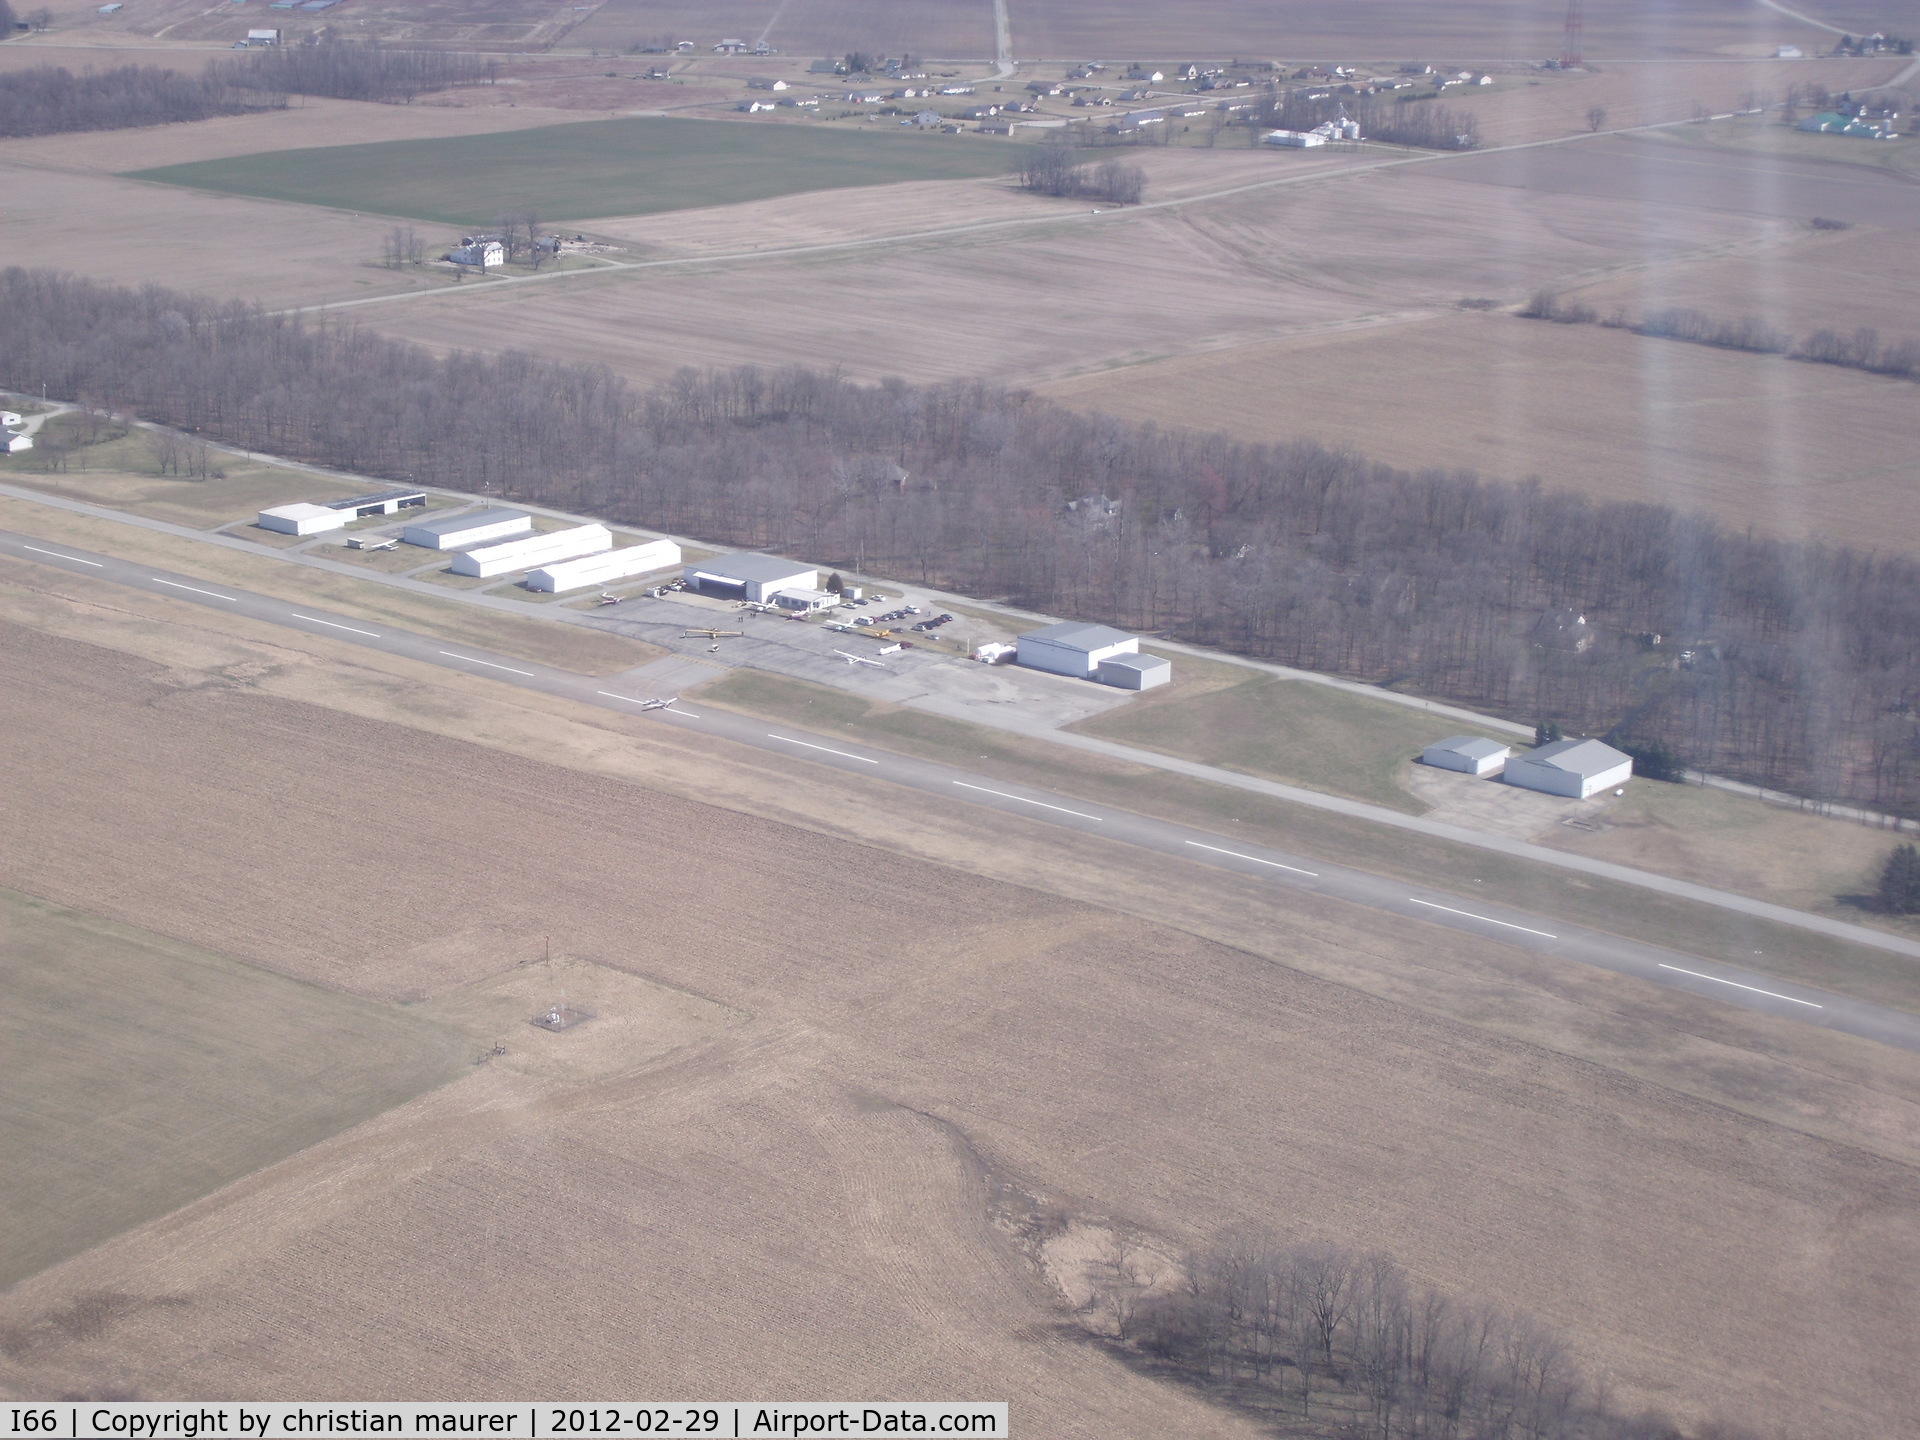 Clinton Field Airport (I66) - clinton county airport

